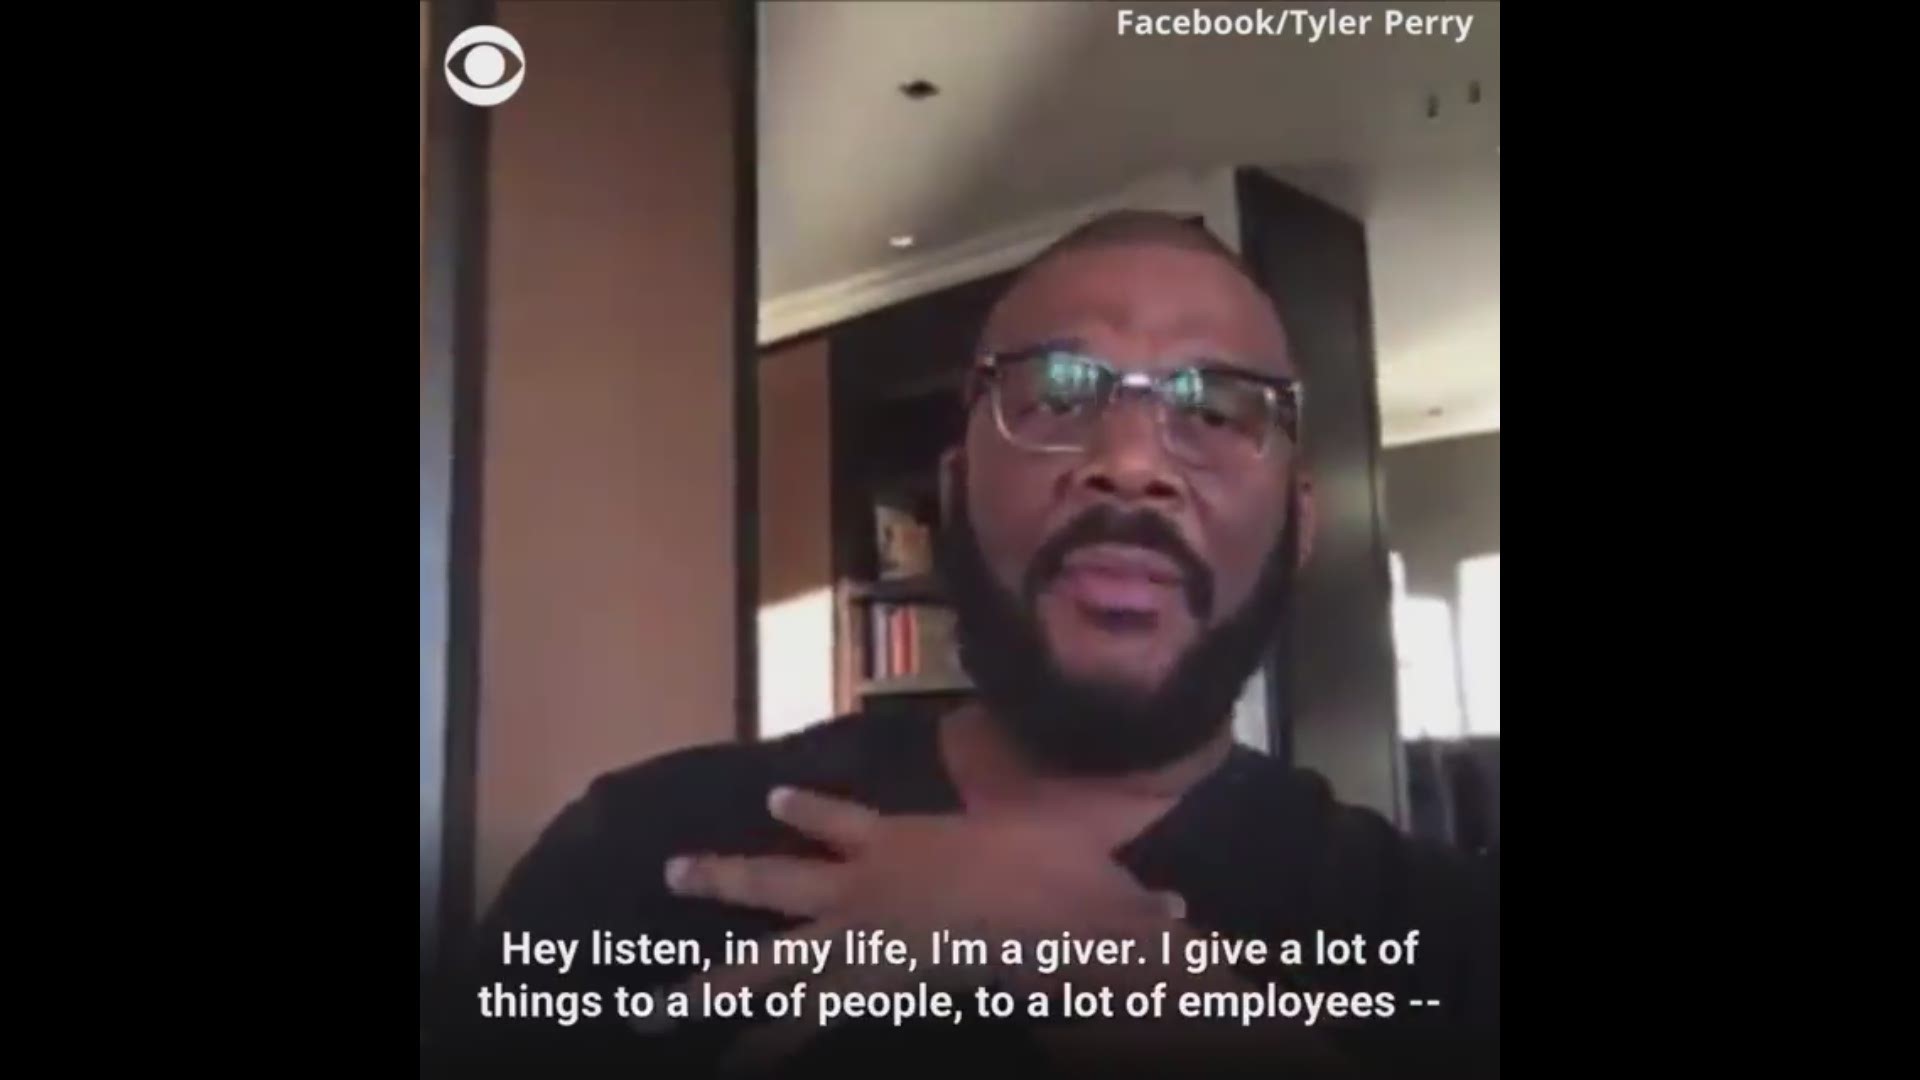 Actor, Director Tyler Perry released a nearly minute-long video squashing rumors he was giving away luxury items. Perry said in the video, "my team has to shut down these things every day. There's a new one popping up - do not give your information to any